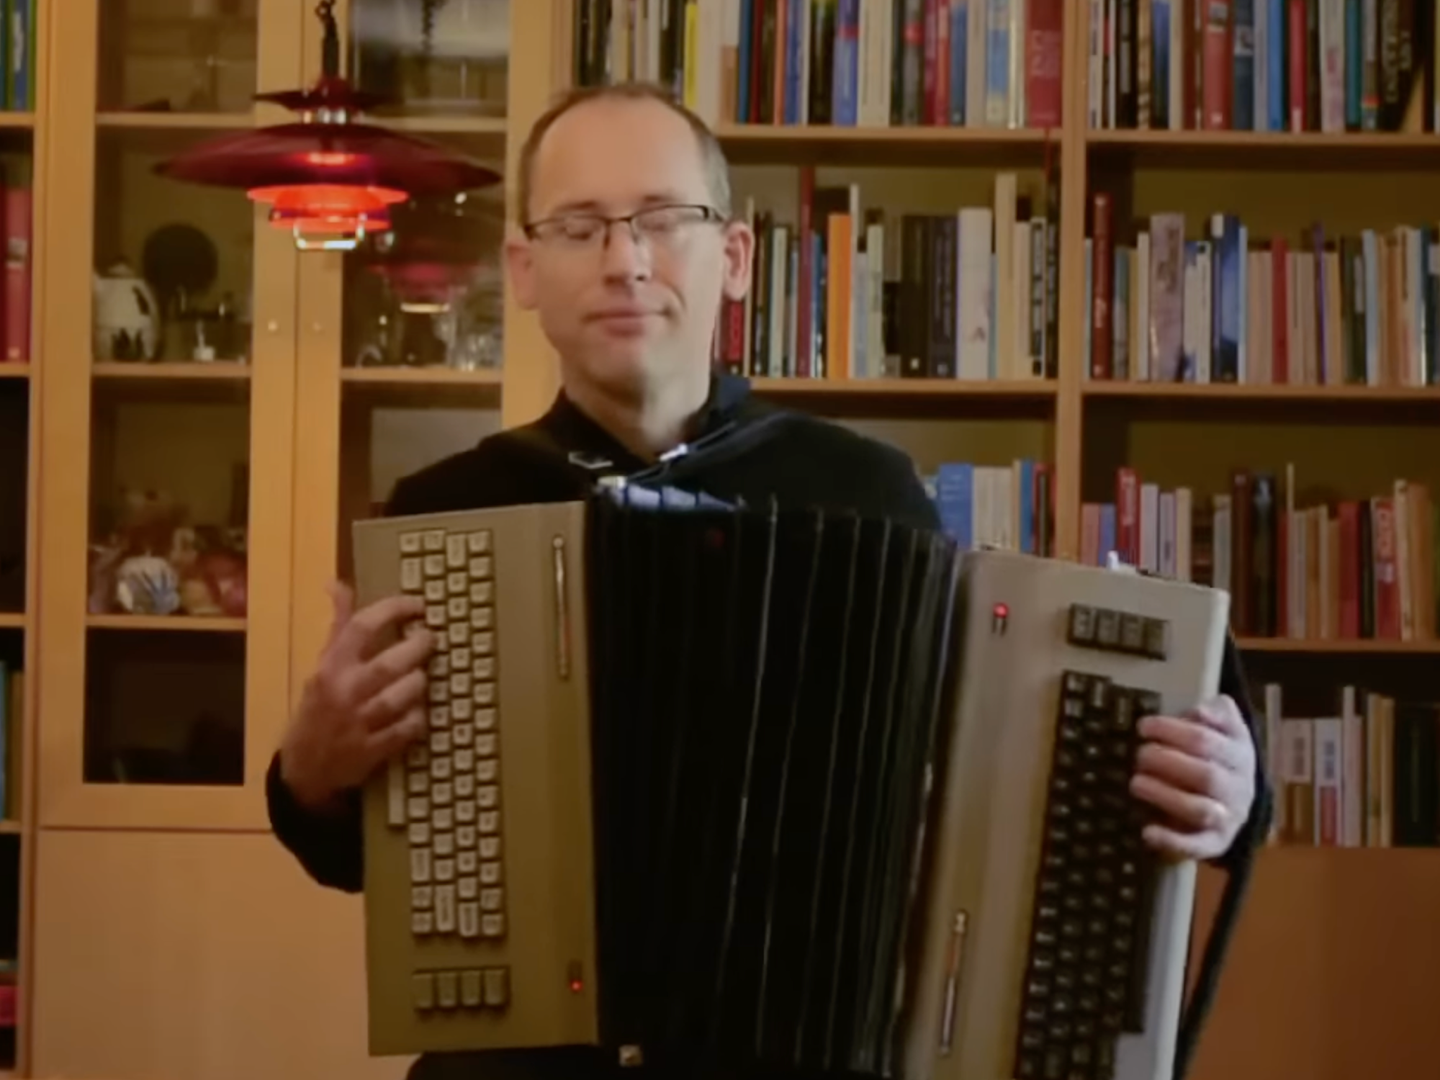 Swedish engineer Linus Åkesson playing homemade accordion made of two Commodore 64 computers and floppy disks